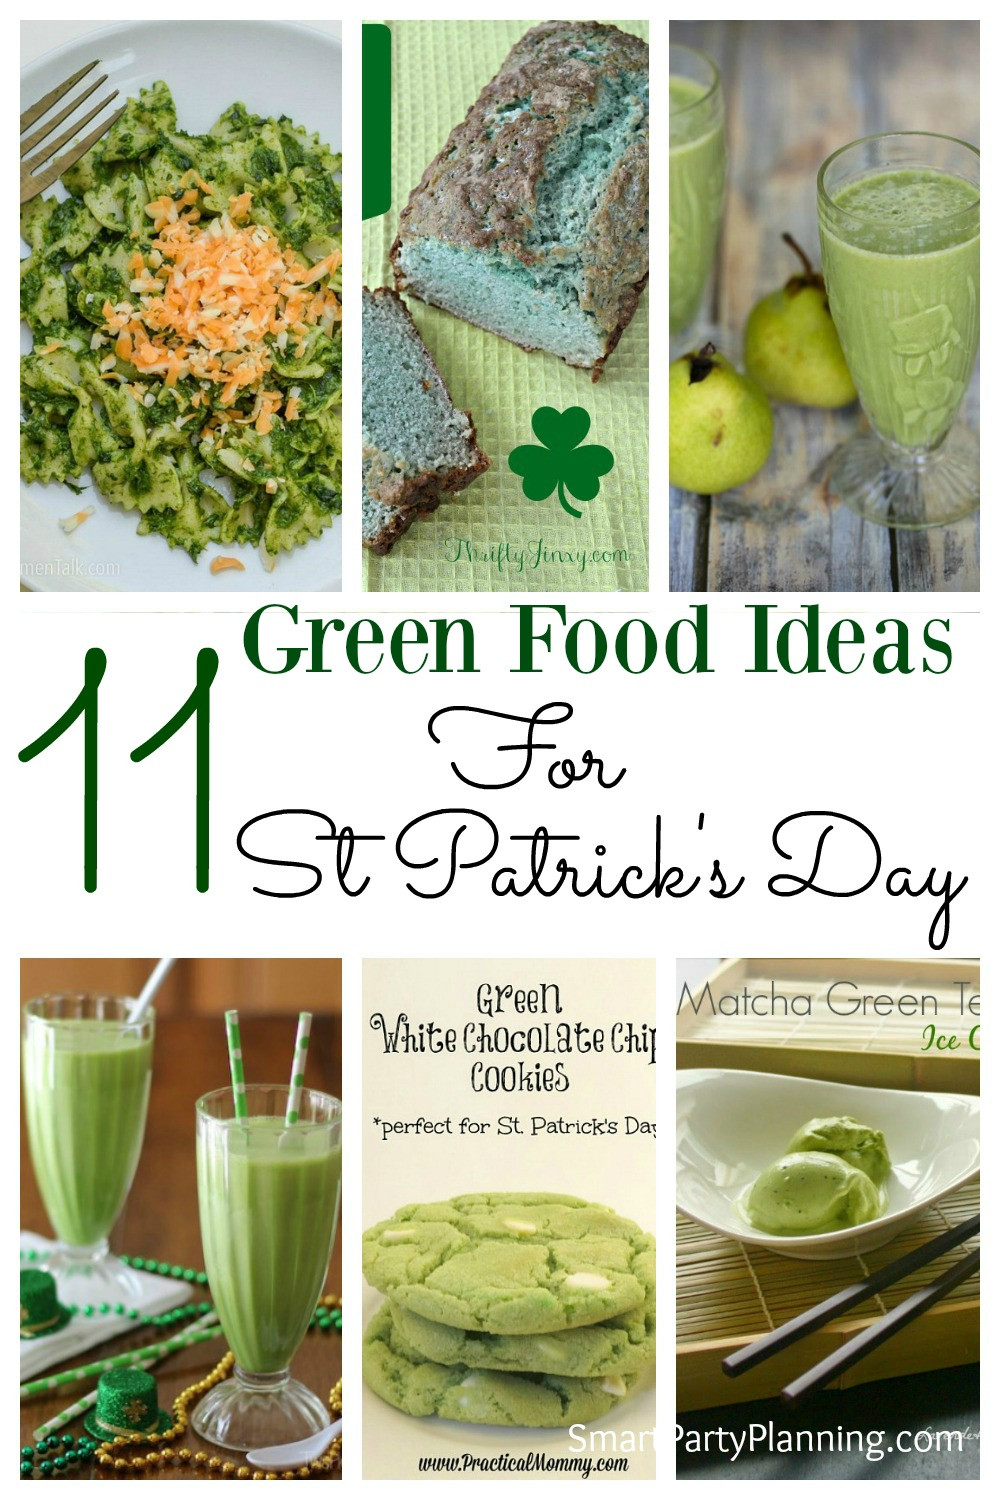 Green Food For St Patrick's Day
 11 Green Food Ideas For St Patrick s Day